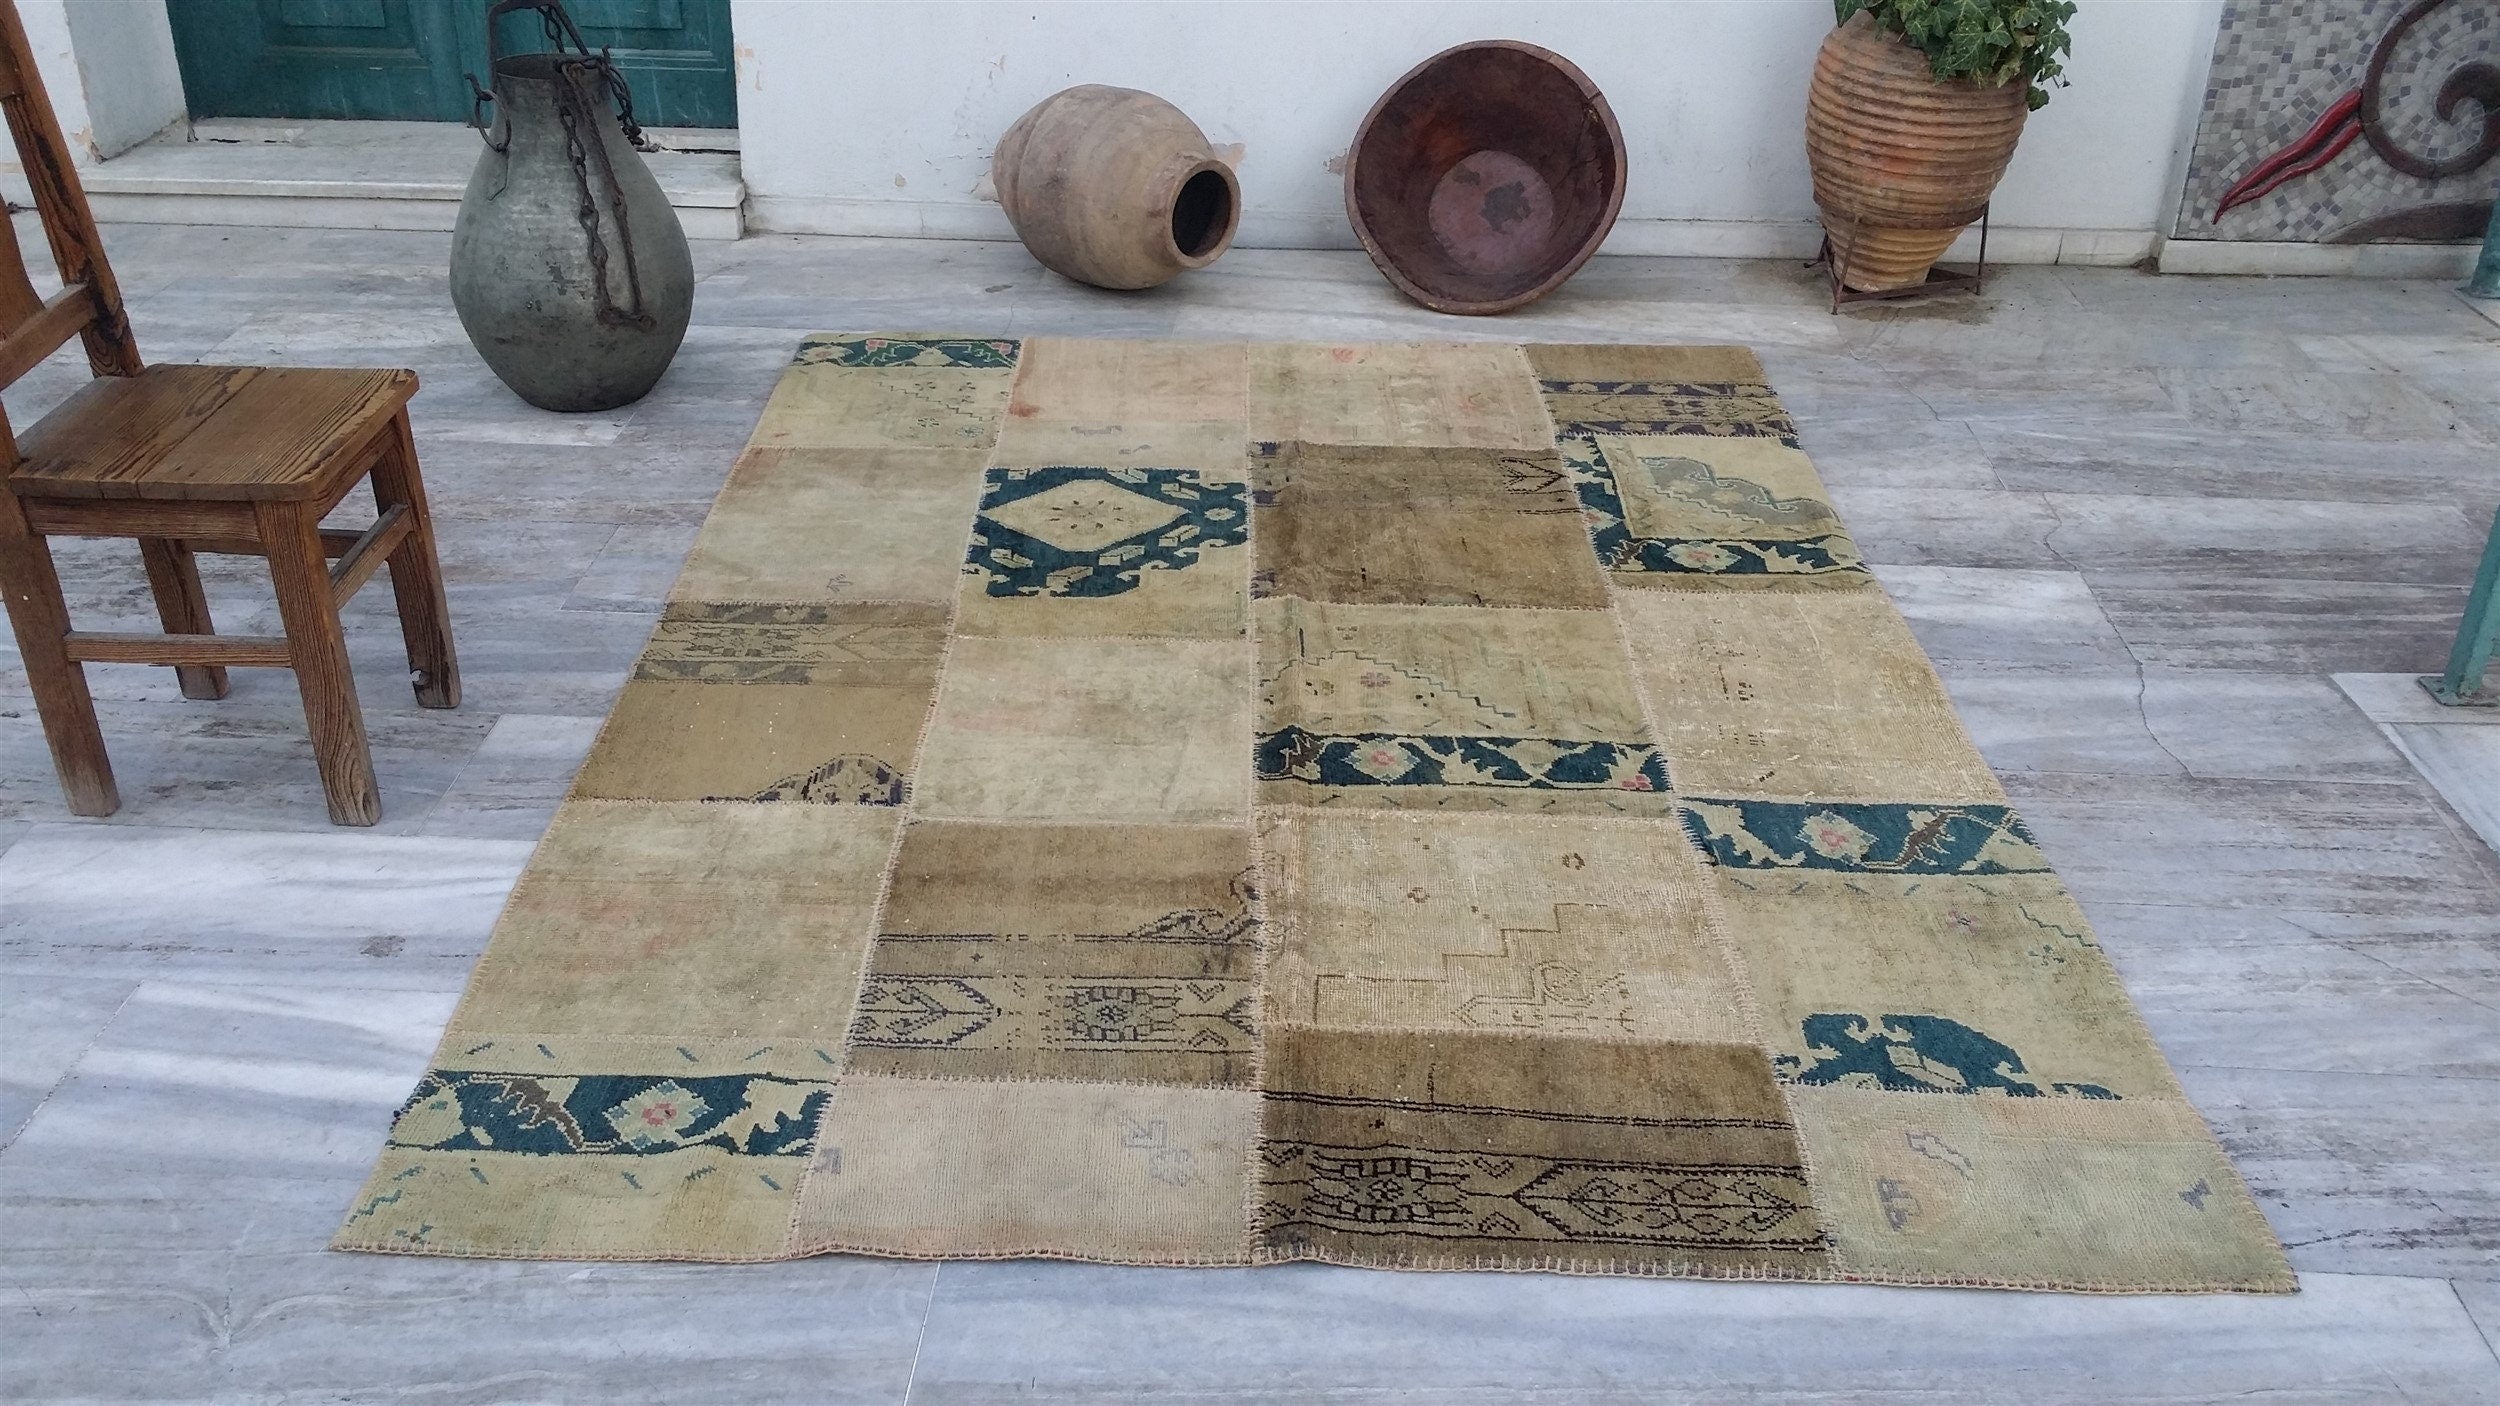 Patchwork Turkish Rug, 7 ft 11 in x 5 ft 9 in Beige and Blue Rustic Decor Living Room Rug